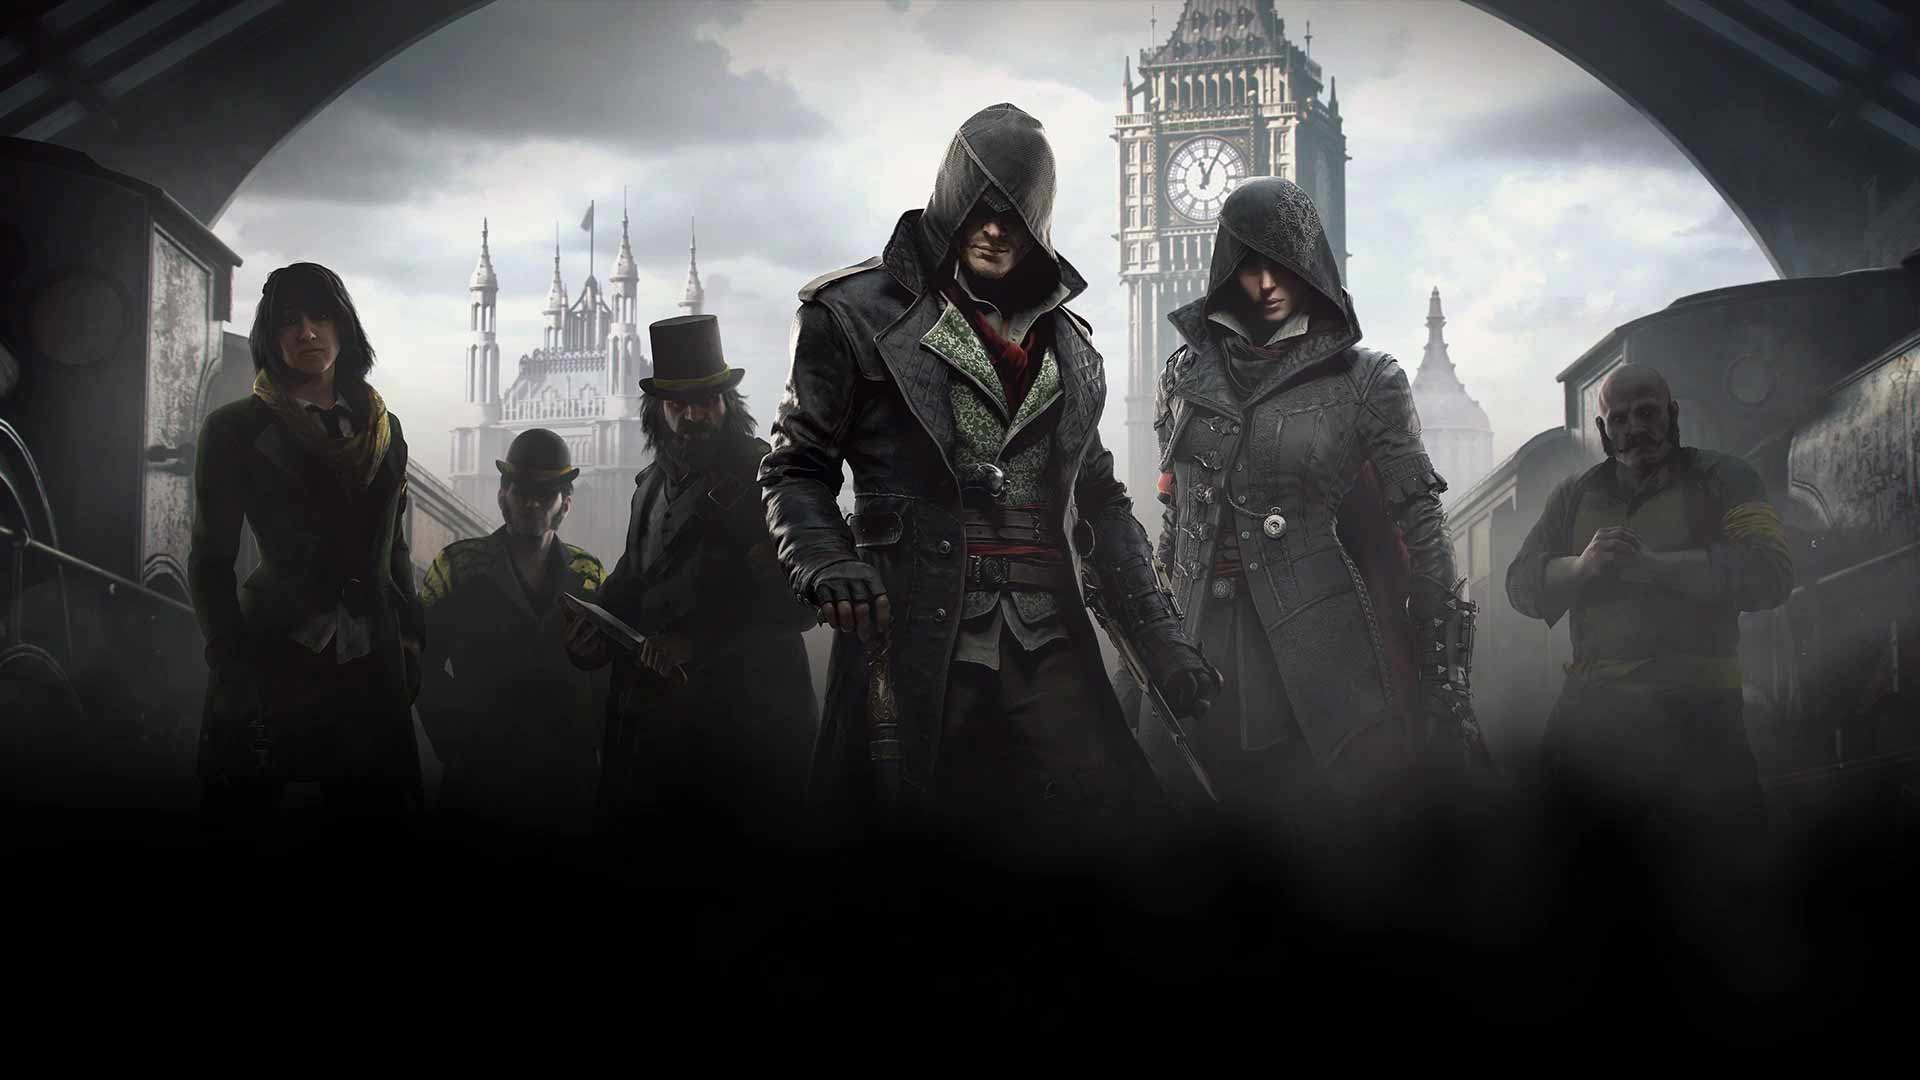 Image for Assassin's Creed Syndicate PS4 Pro Patch 1.51 Analysis